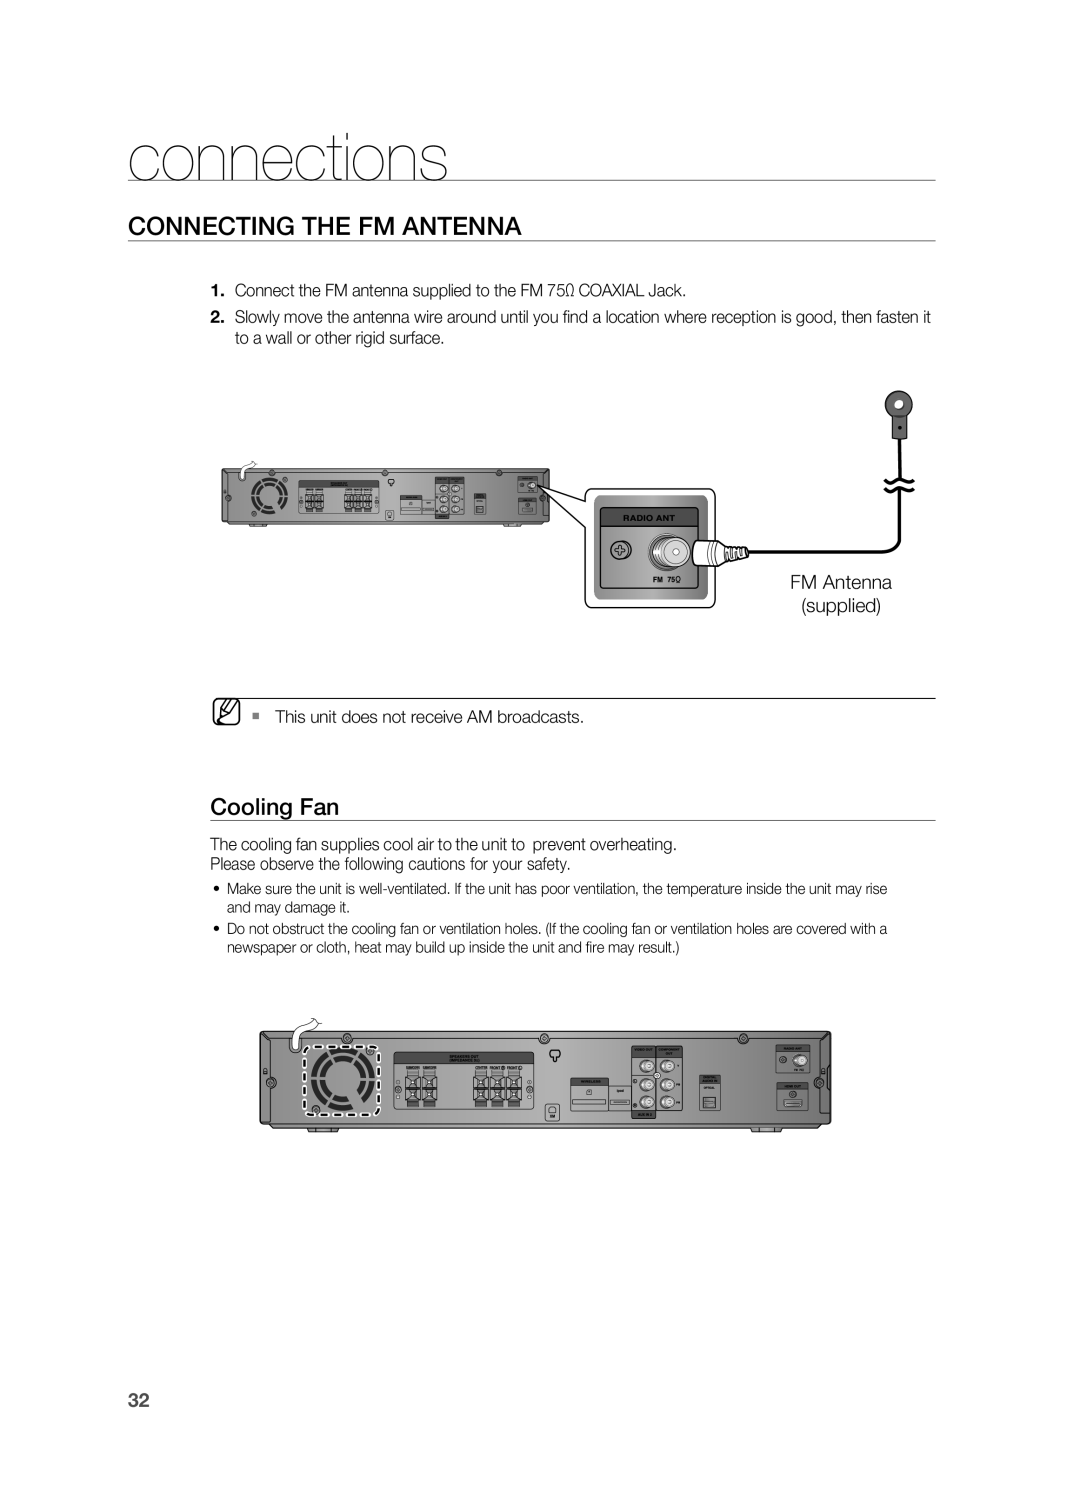 Samsung HT-Z510 manual Connecting the FM Antenna, connections, Cooling Fan 